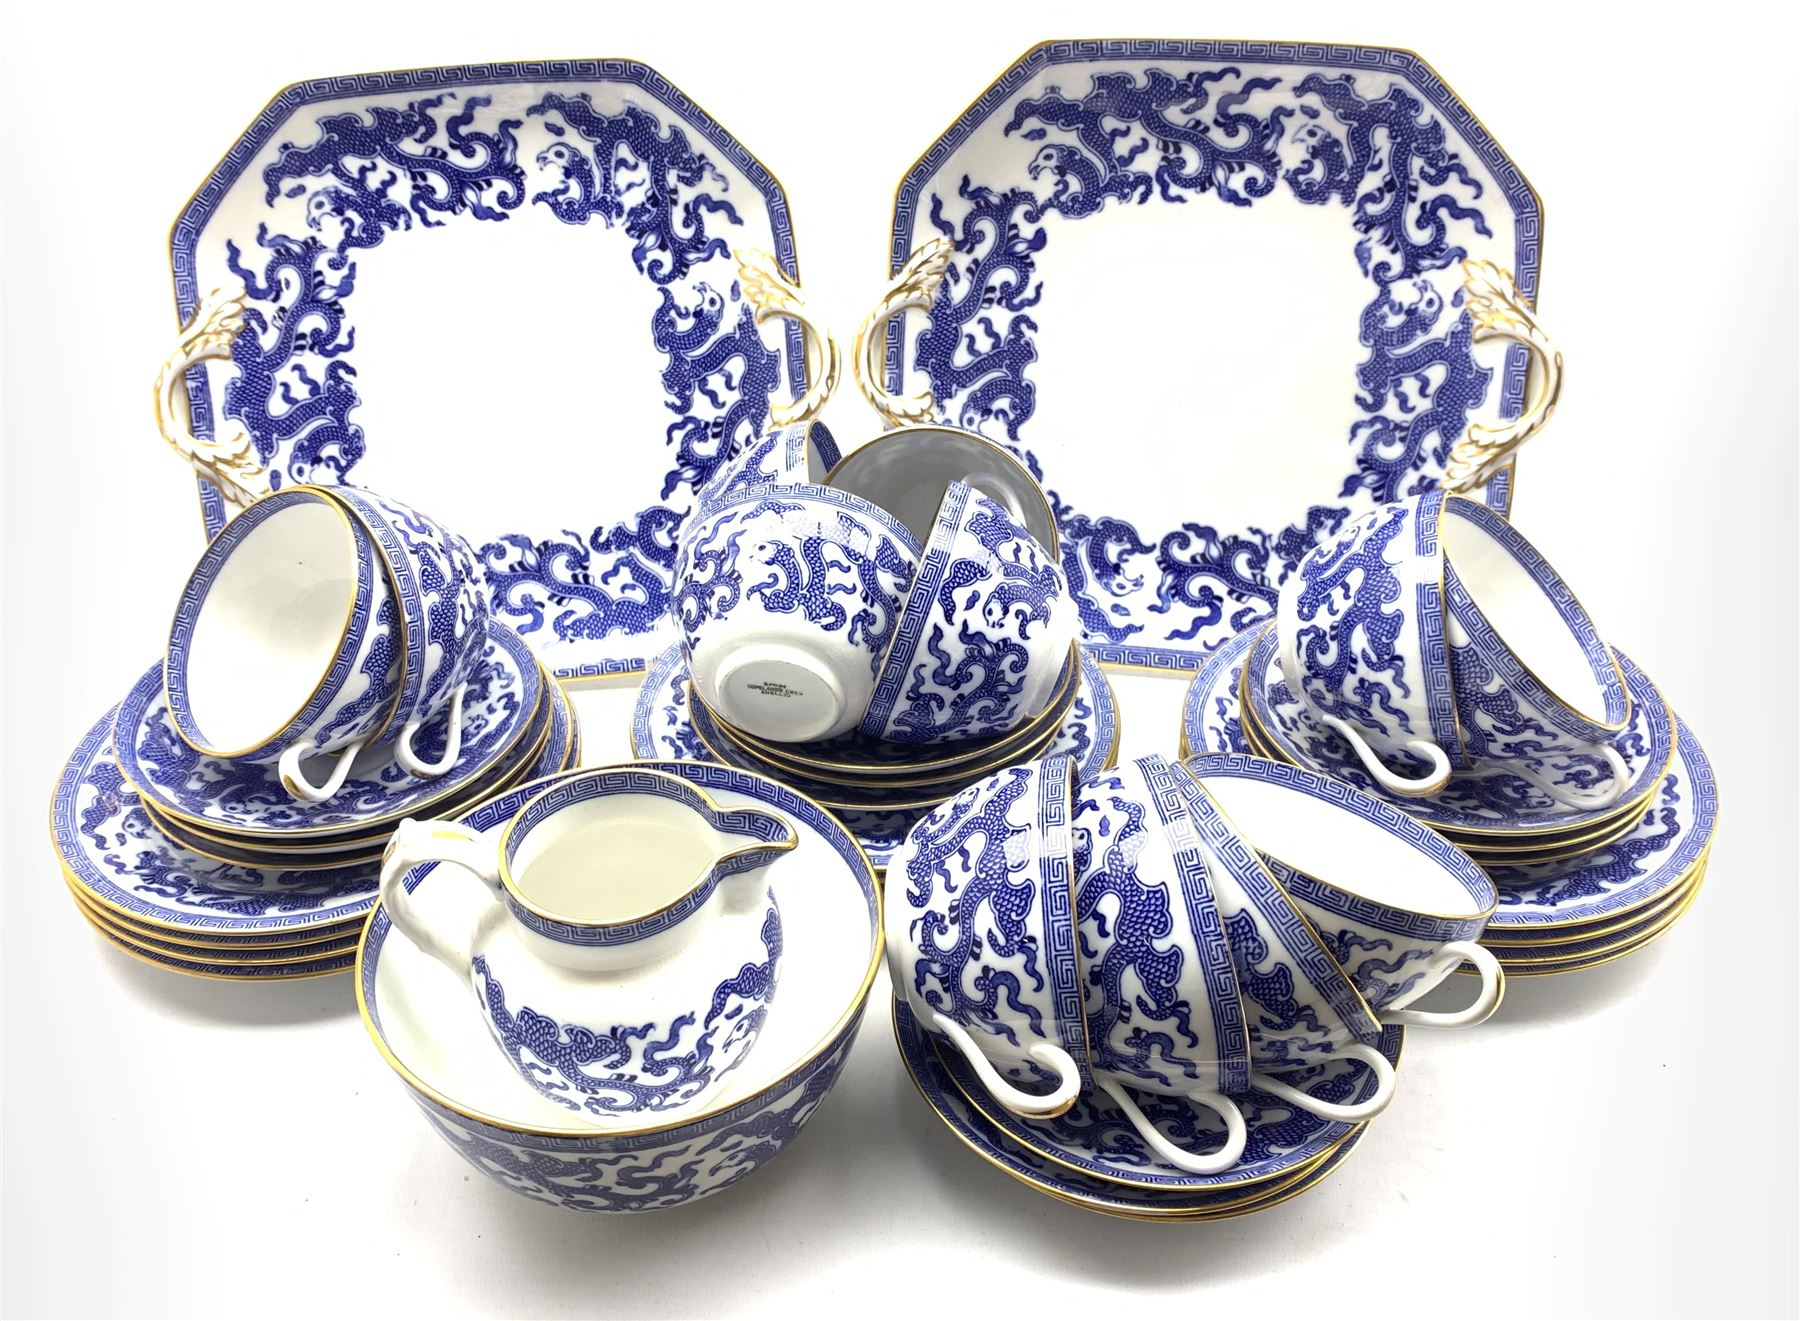 Spode Copelands China tea set decorated with an Oriental design in blue and white with key pattern b